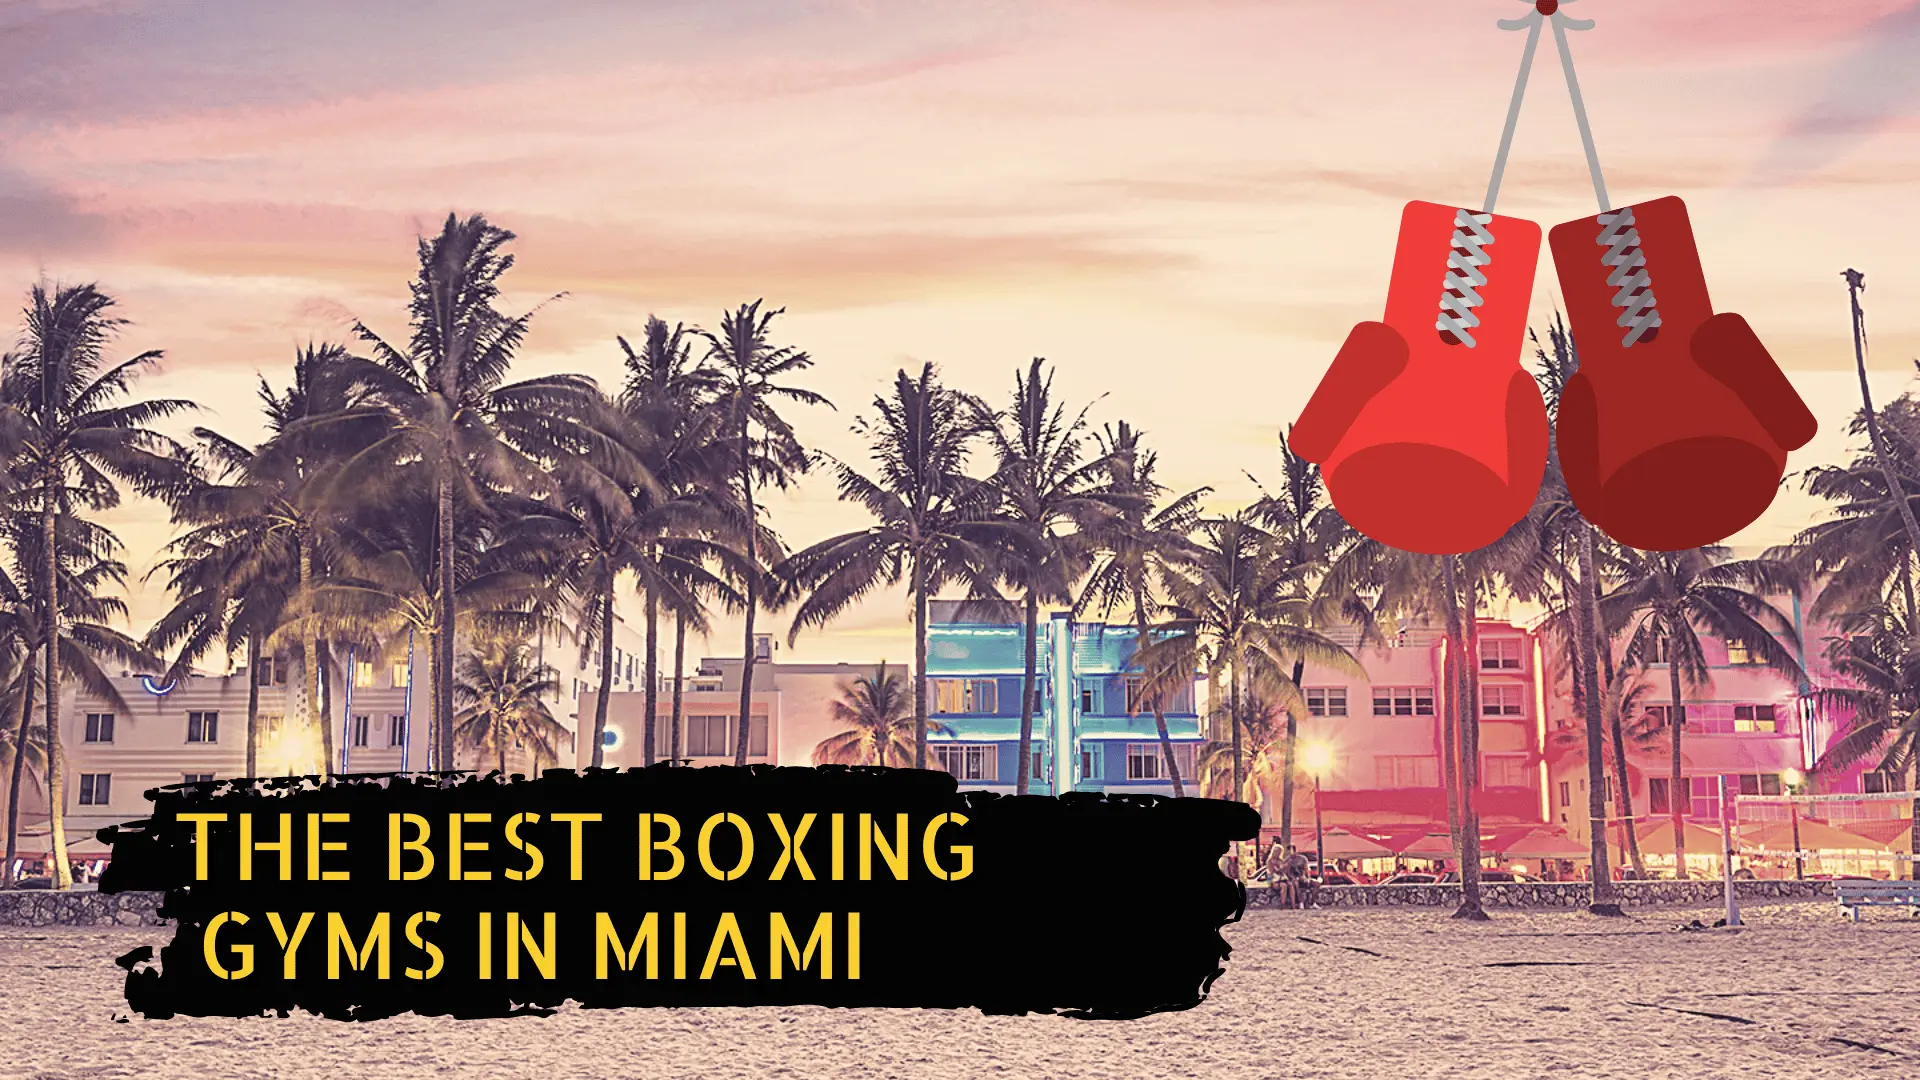 A picture of Miami beach and some boxing gloves with the title "the best boxing gyms in miami"